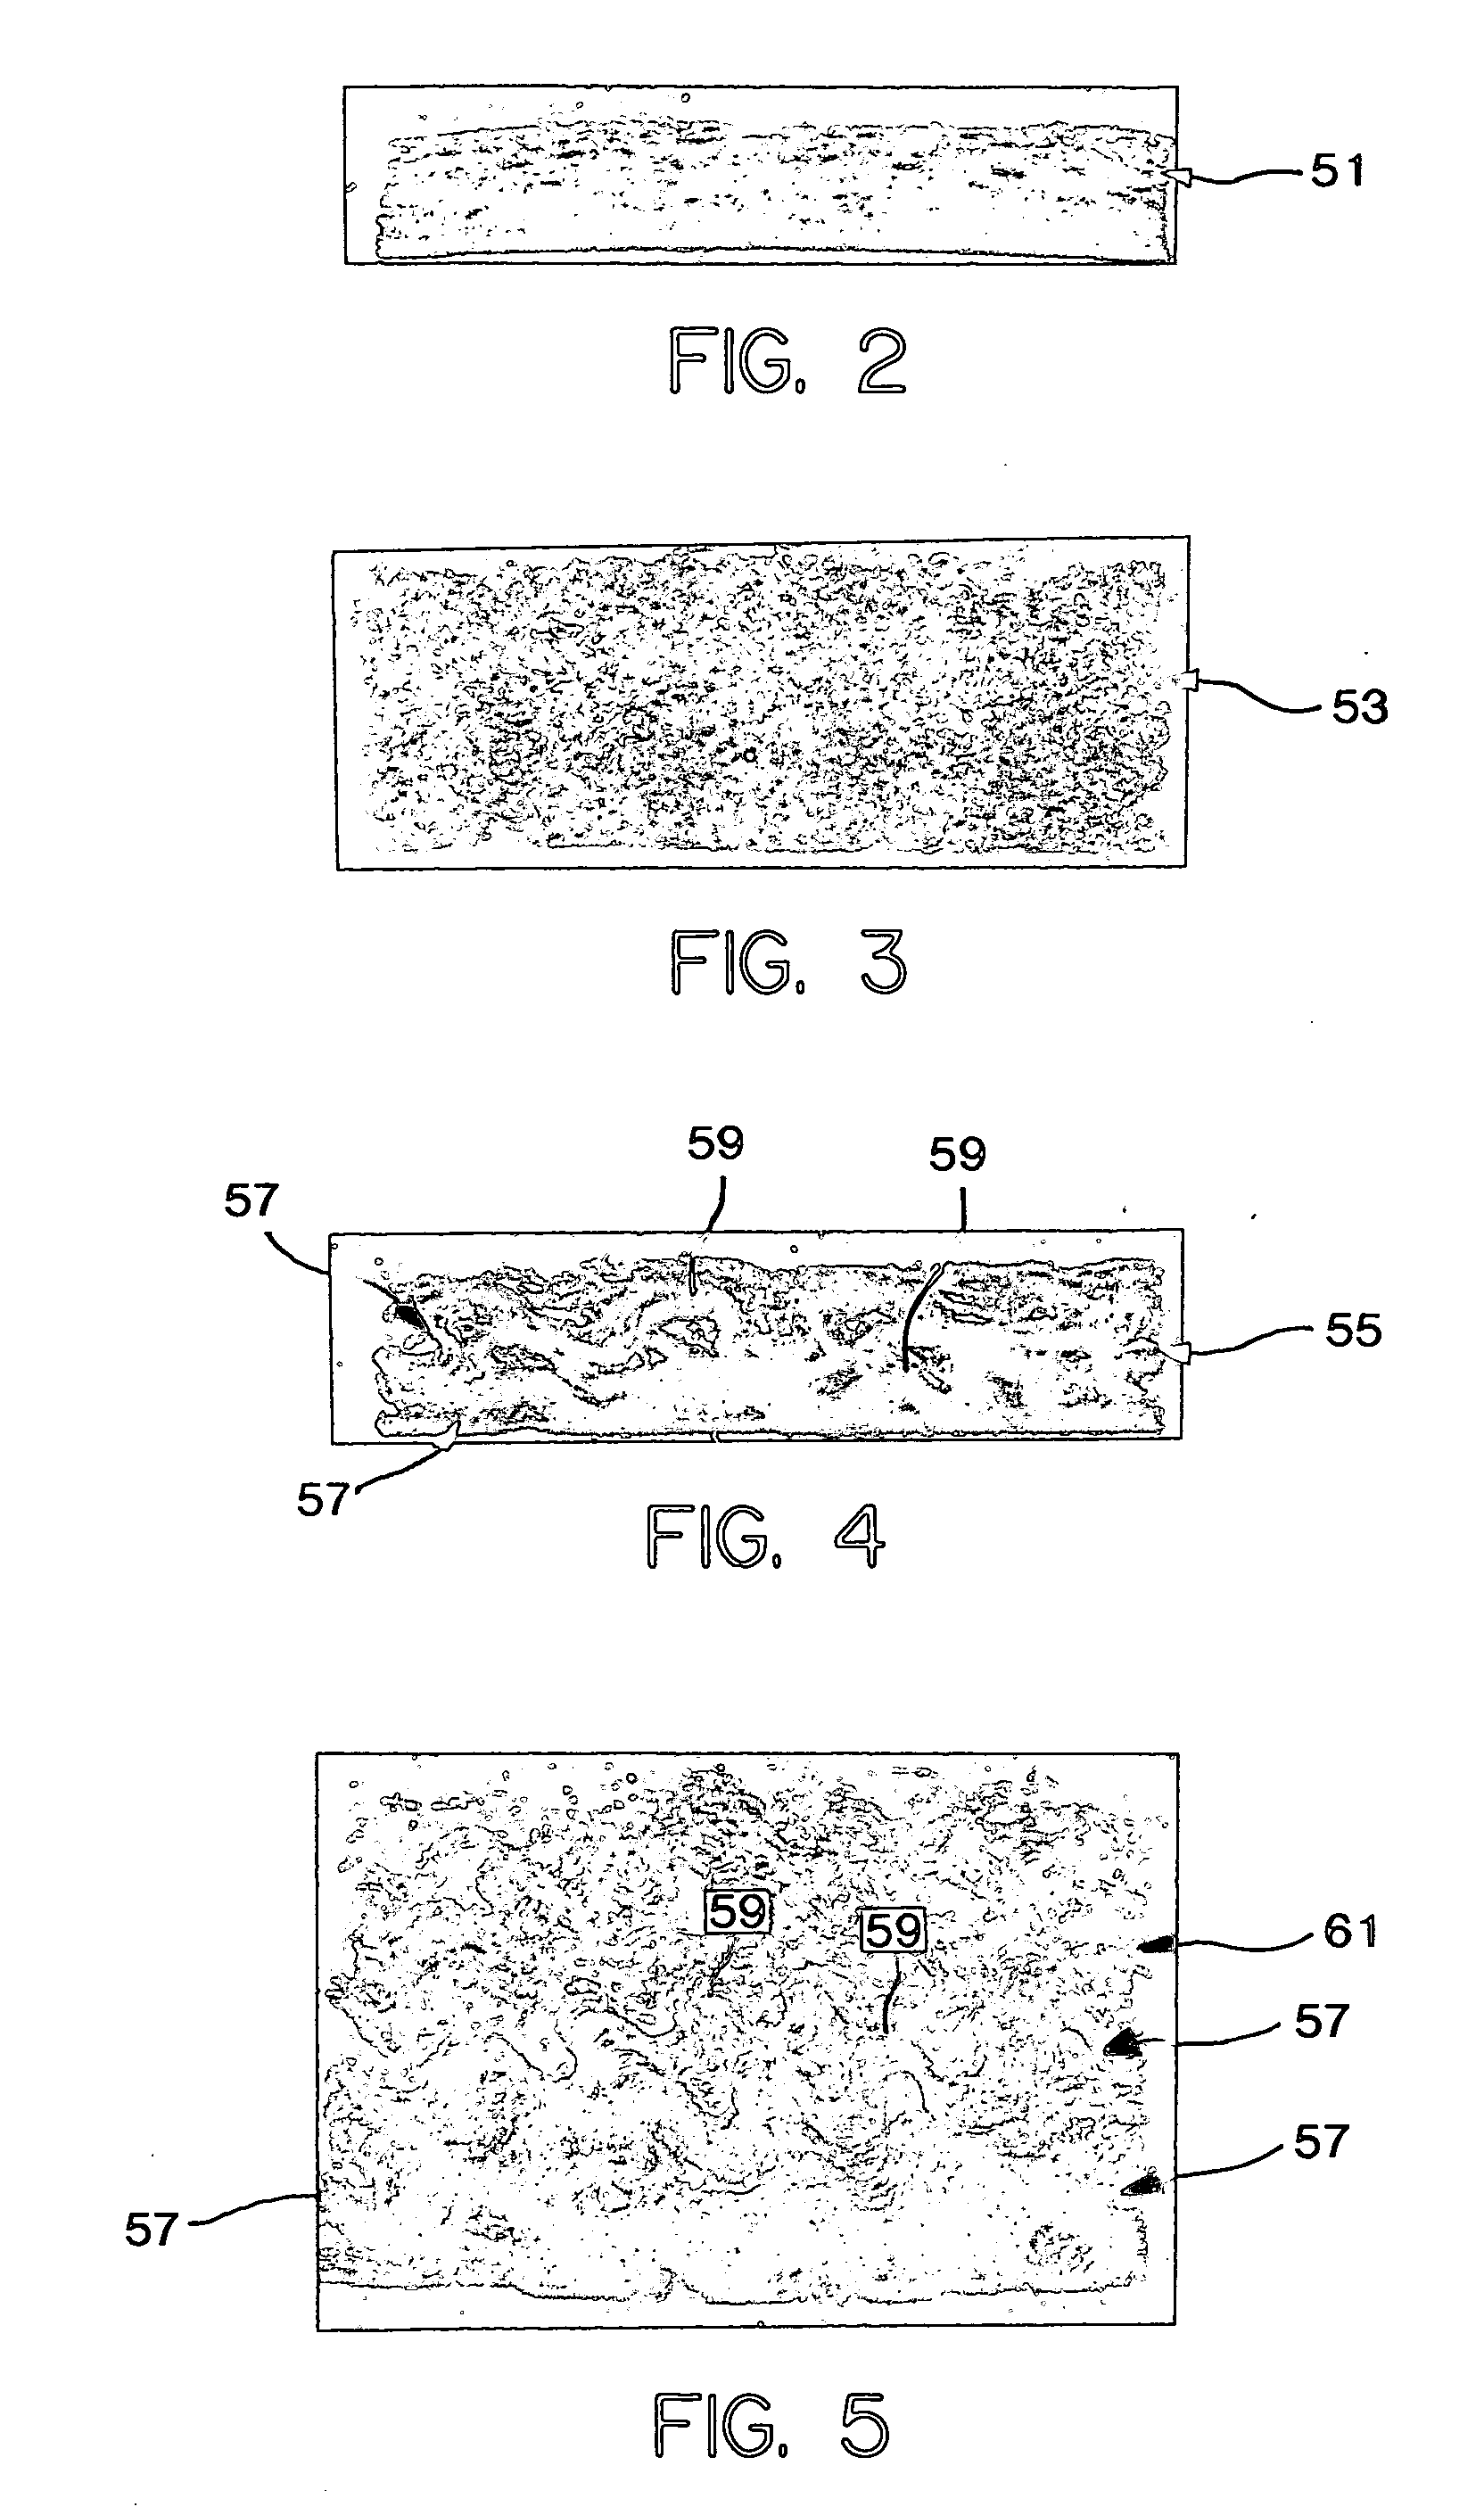 High loft low density nonwoven webs of crimped filaments and methods of making same